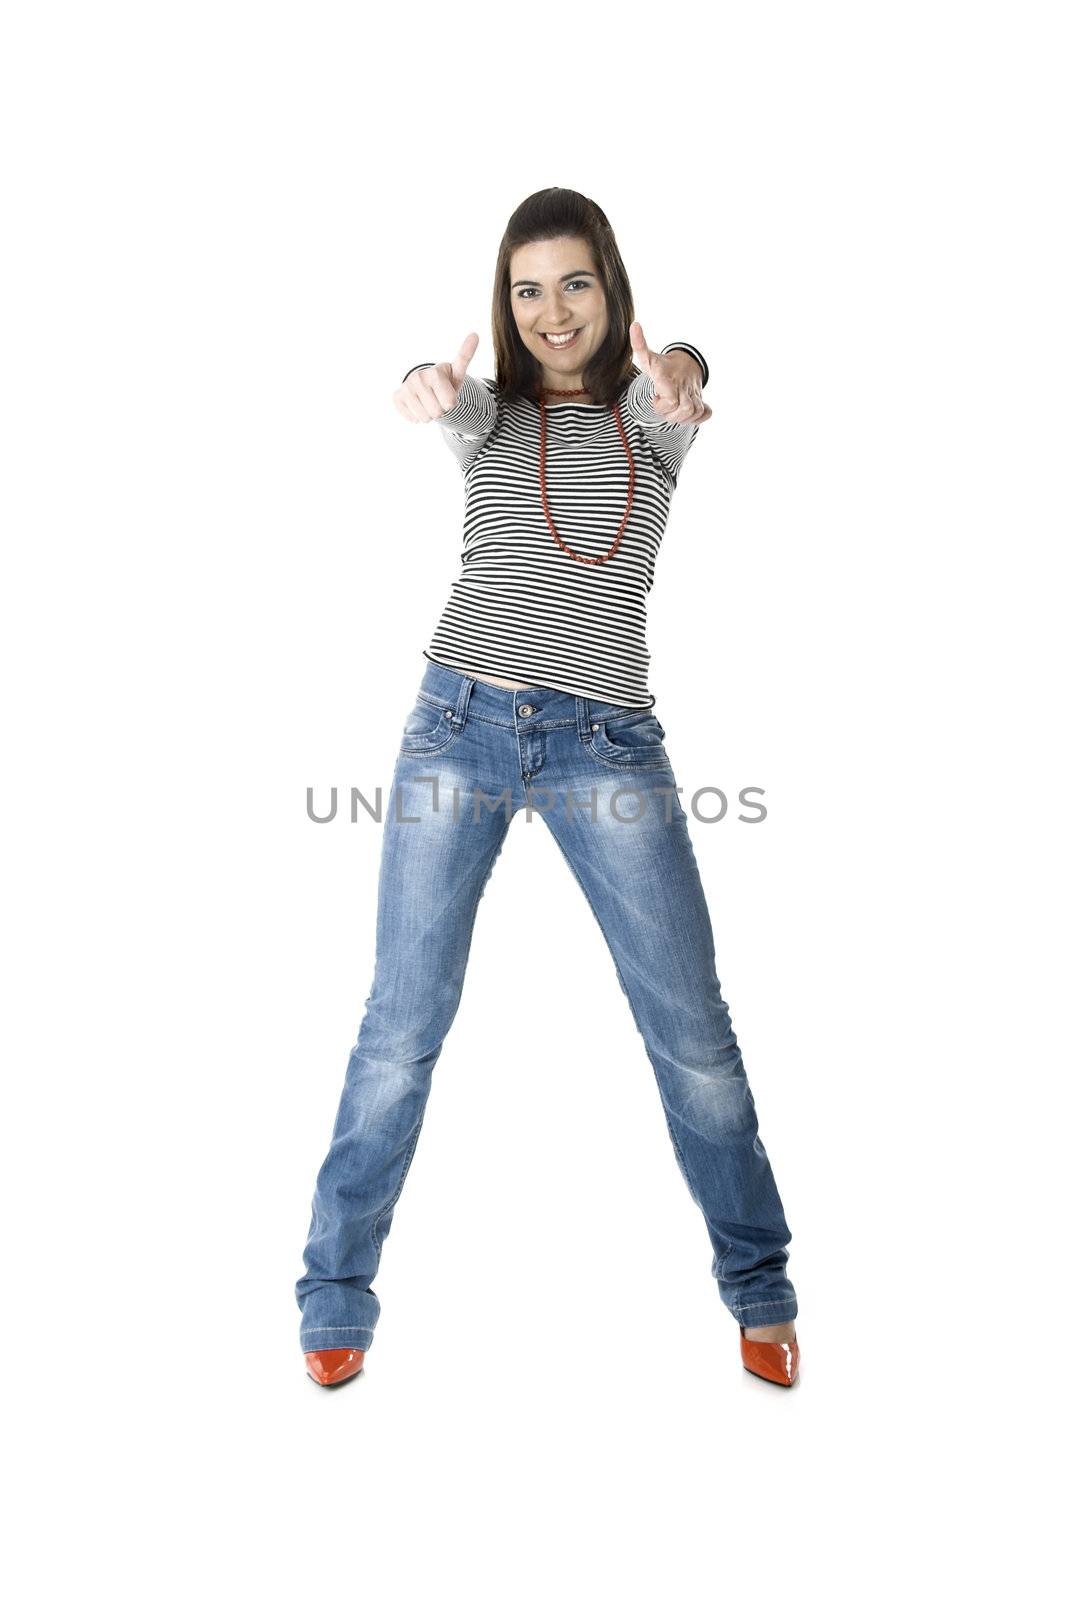 Beautiful young woman in blue jeans isolated on white